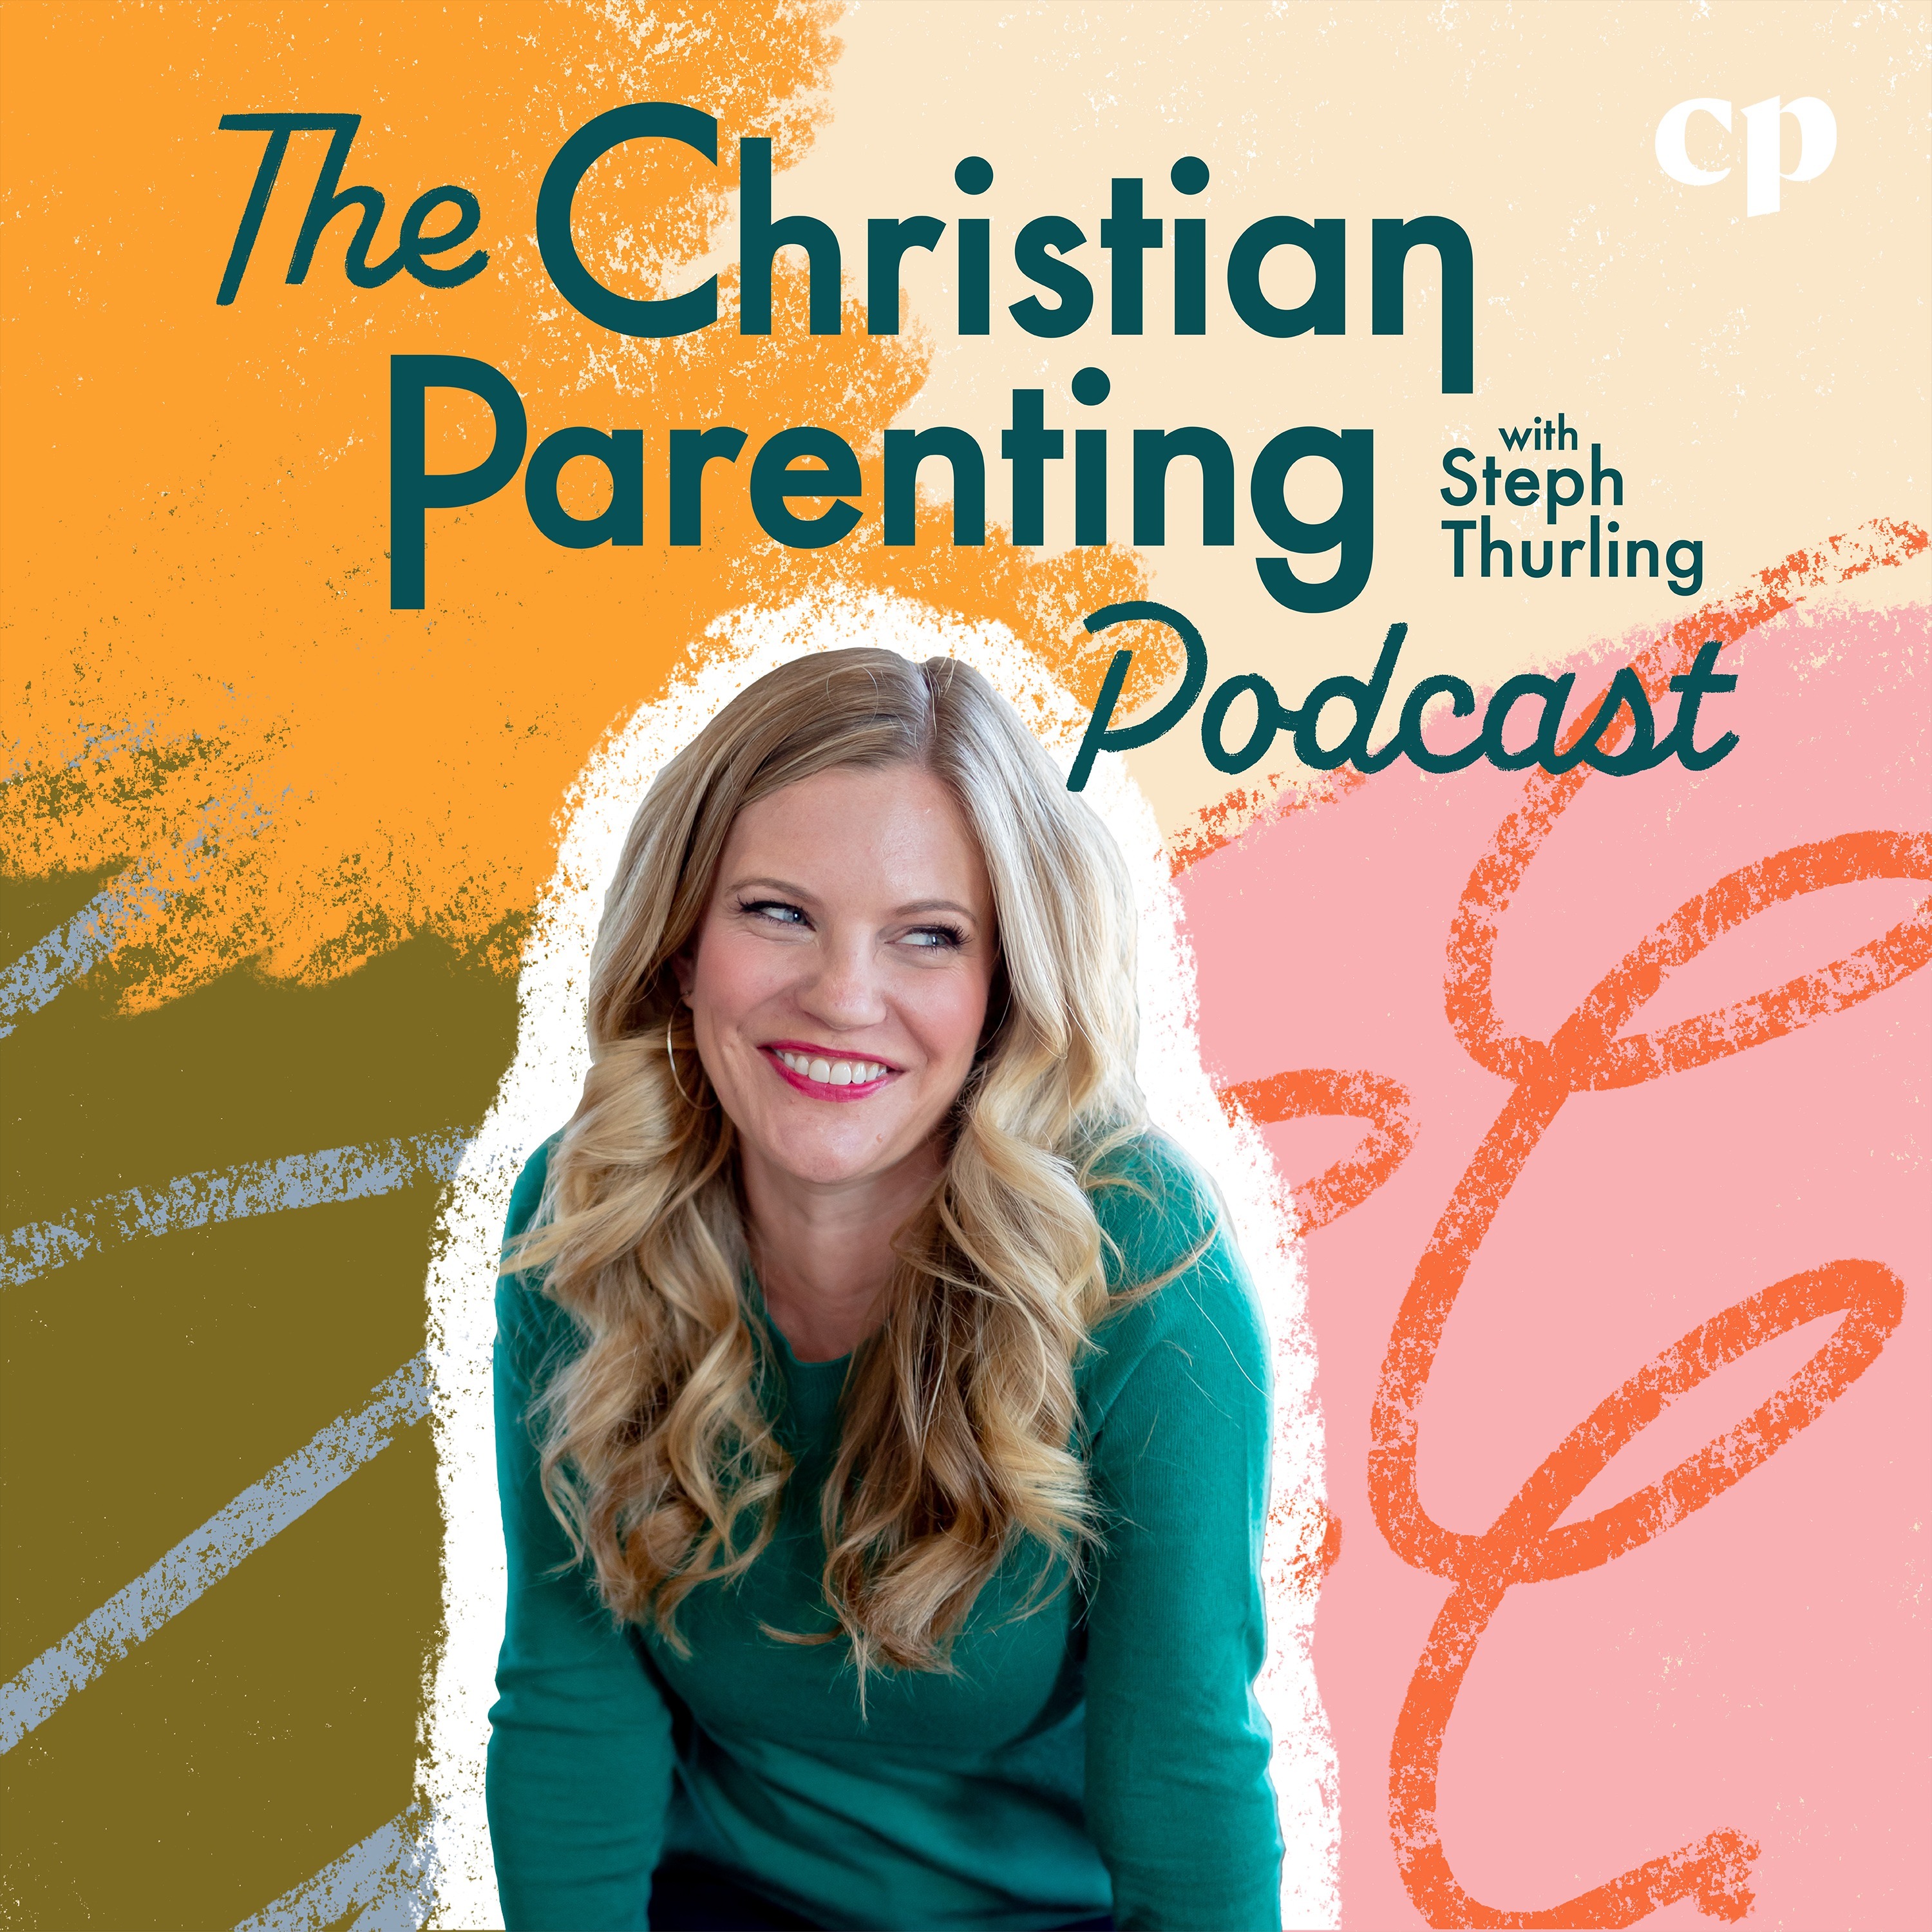 The Christian Parenting Podcast